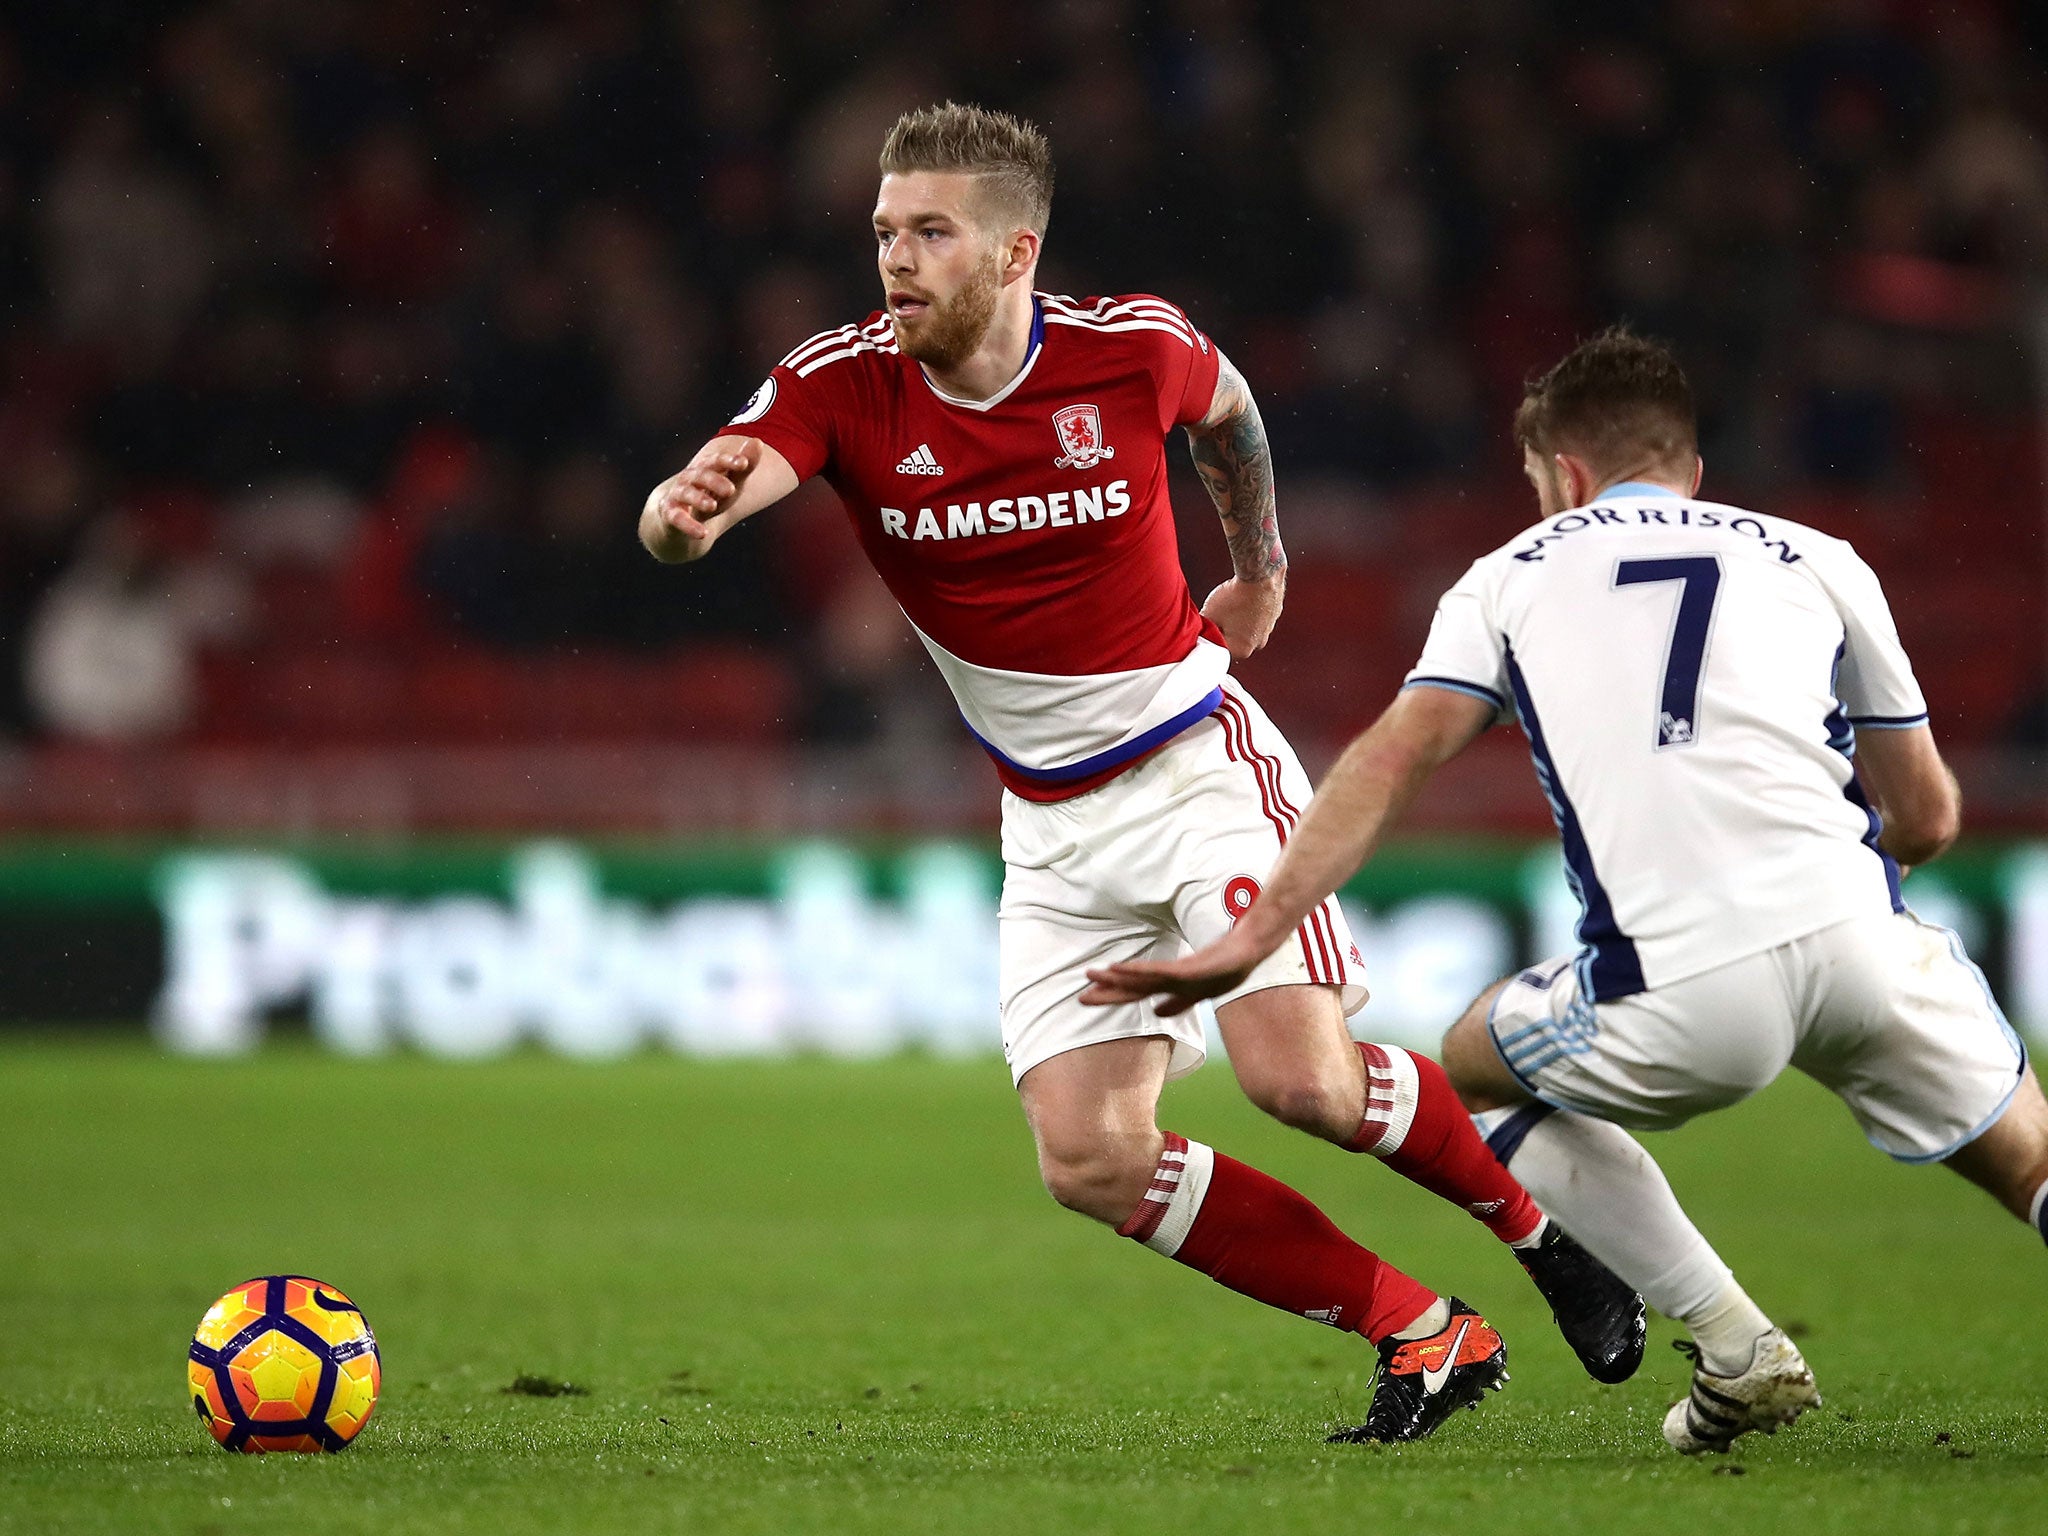 Clayton has been an ever-present in the Middlesbrough midfield this season